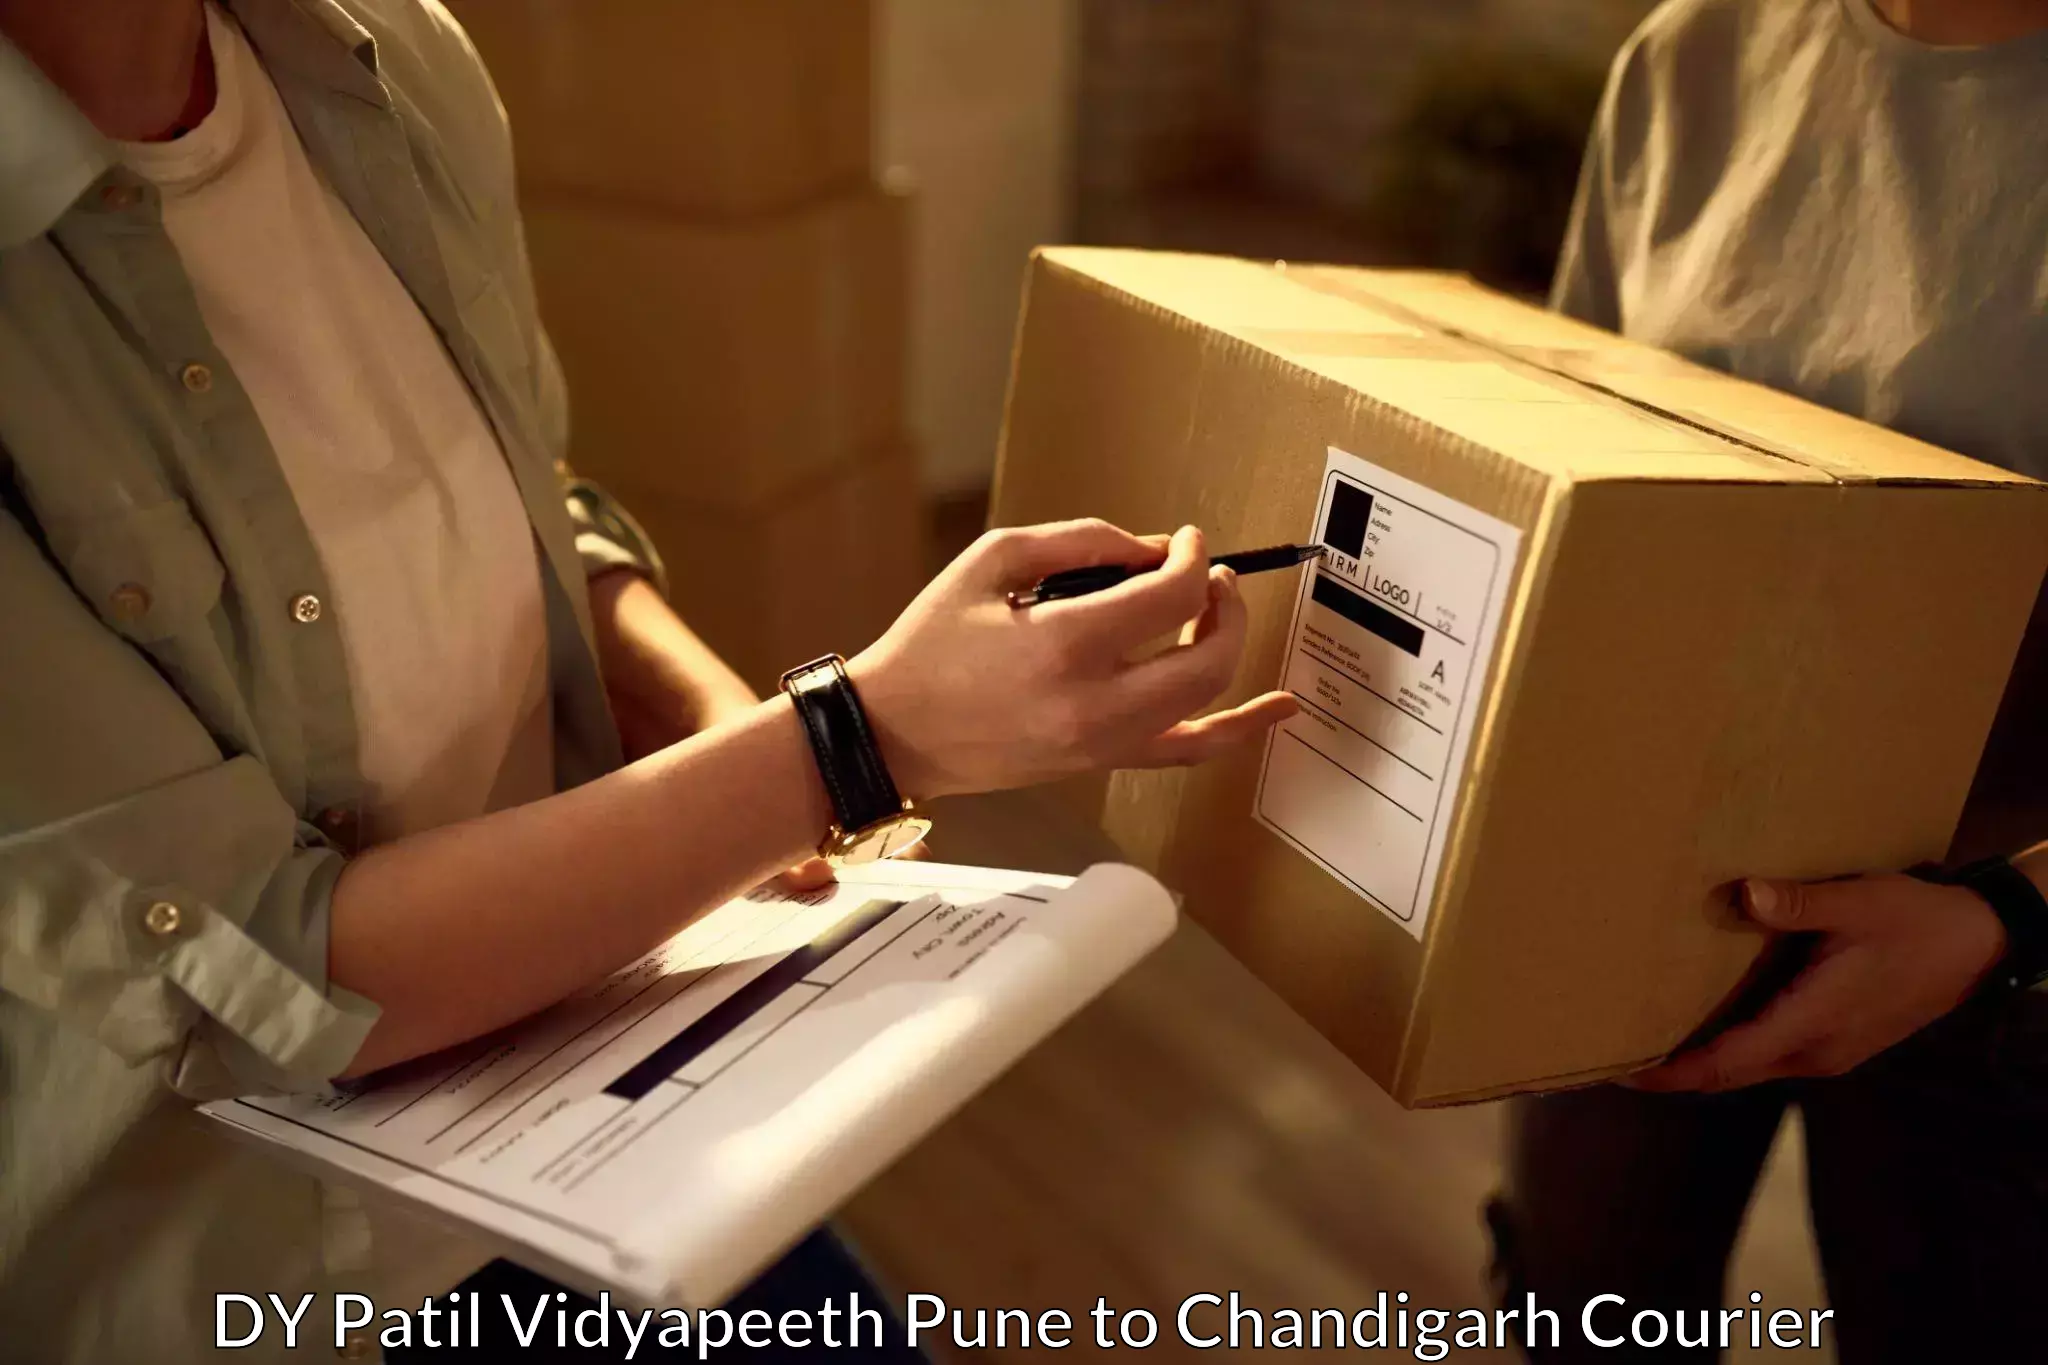 Tech-enabled shipping DY Patil Vidyapeeth Pune to Chandigarh